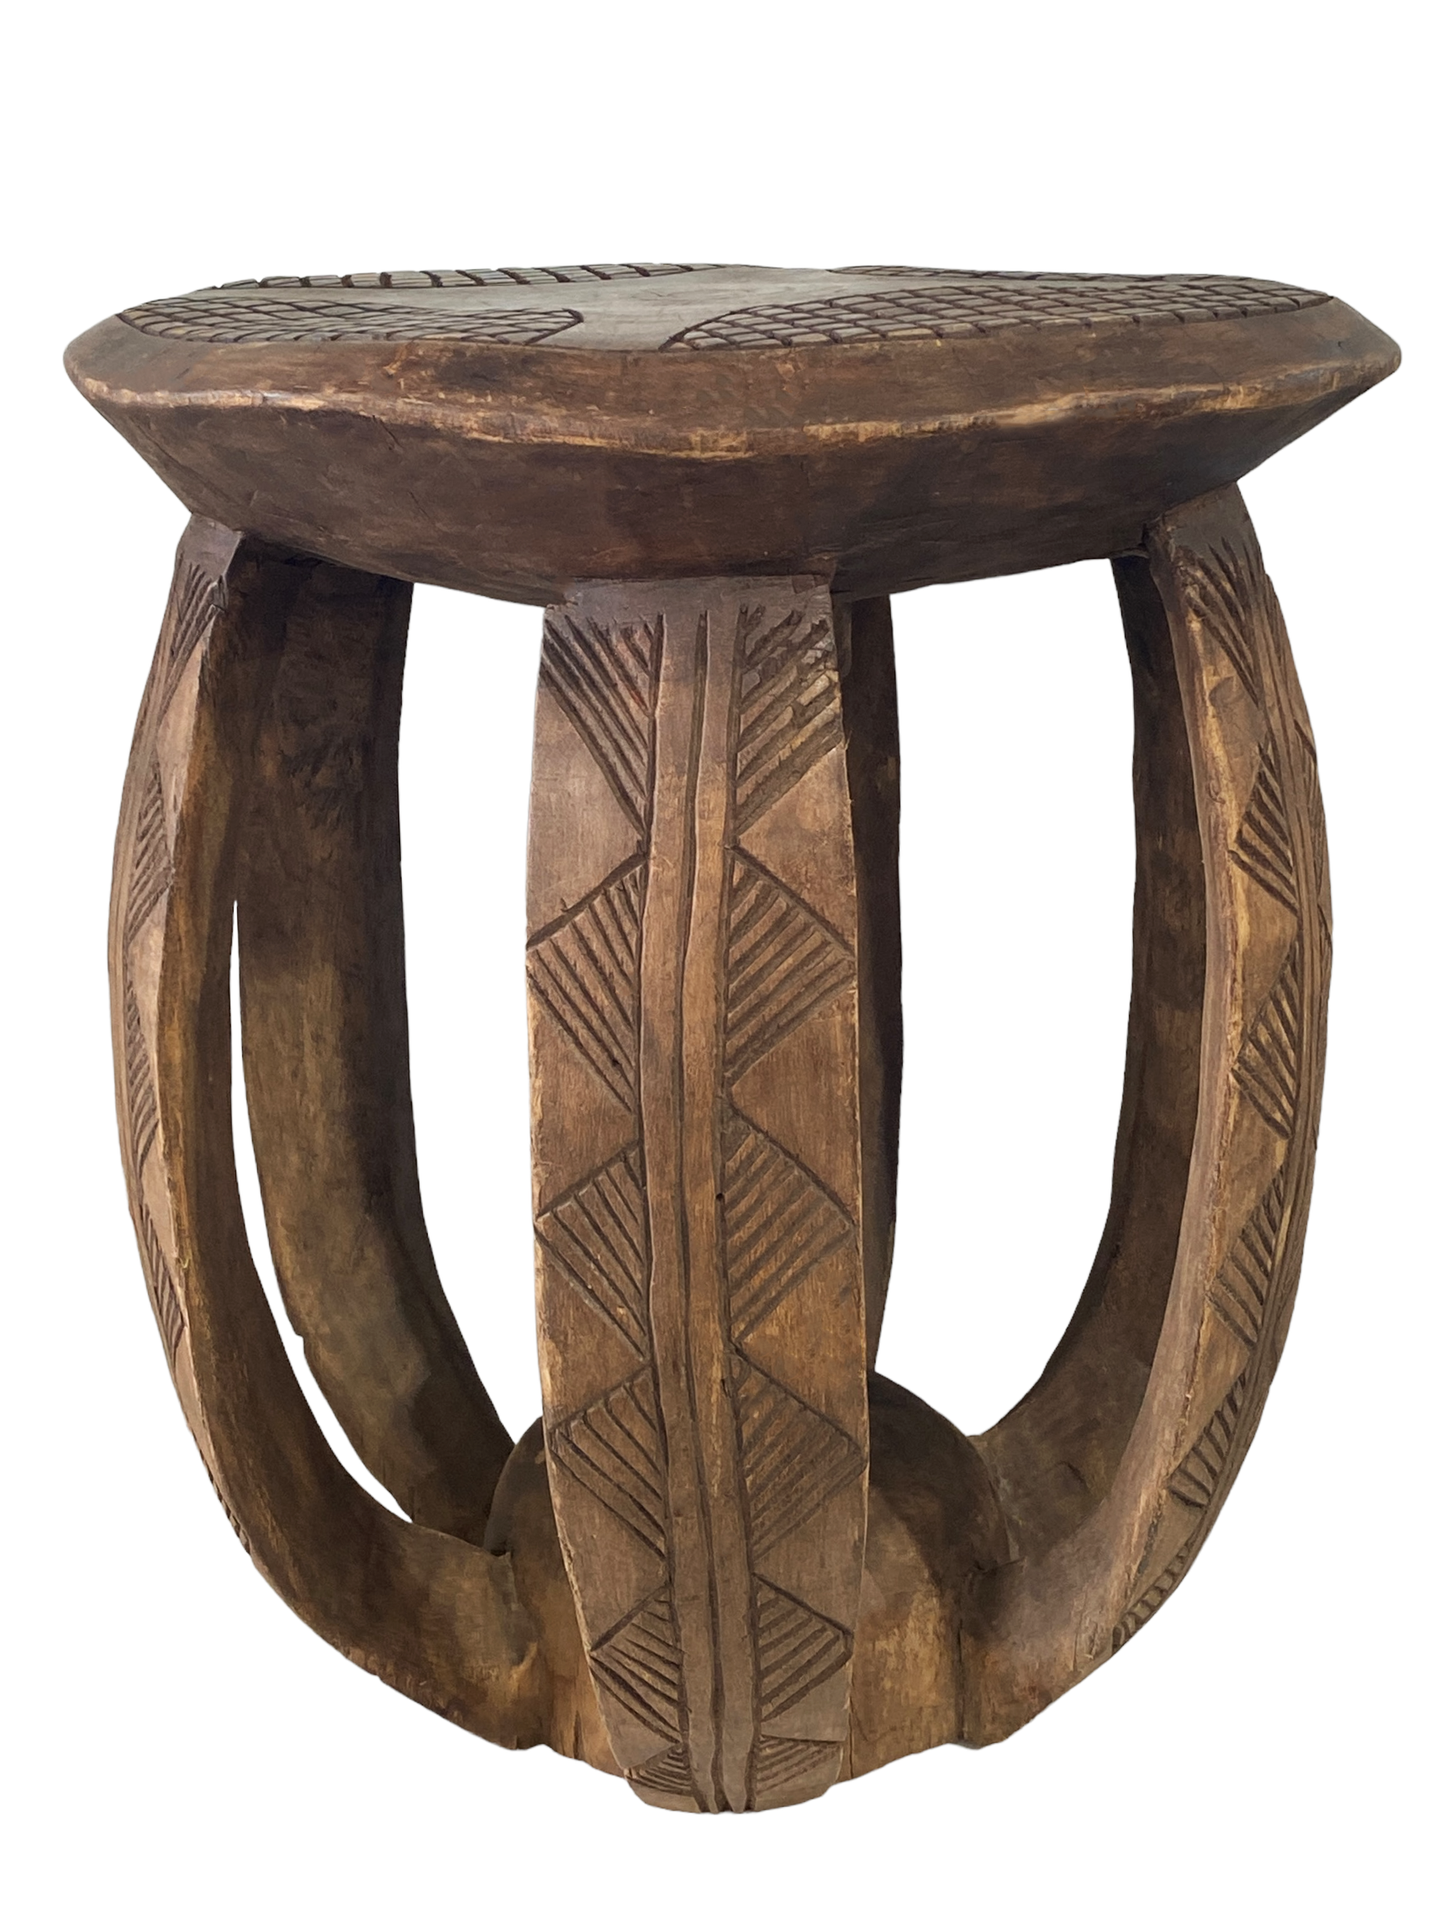 #5186 LG African  Baga Stool /Table  Guinea-Bissau  20.25" H by 17"D